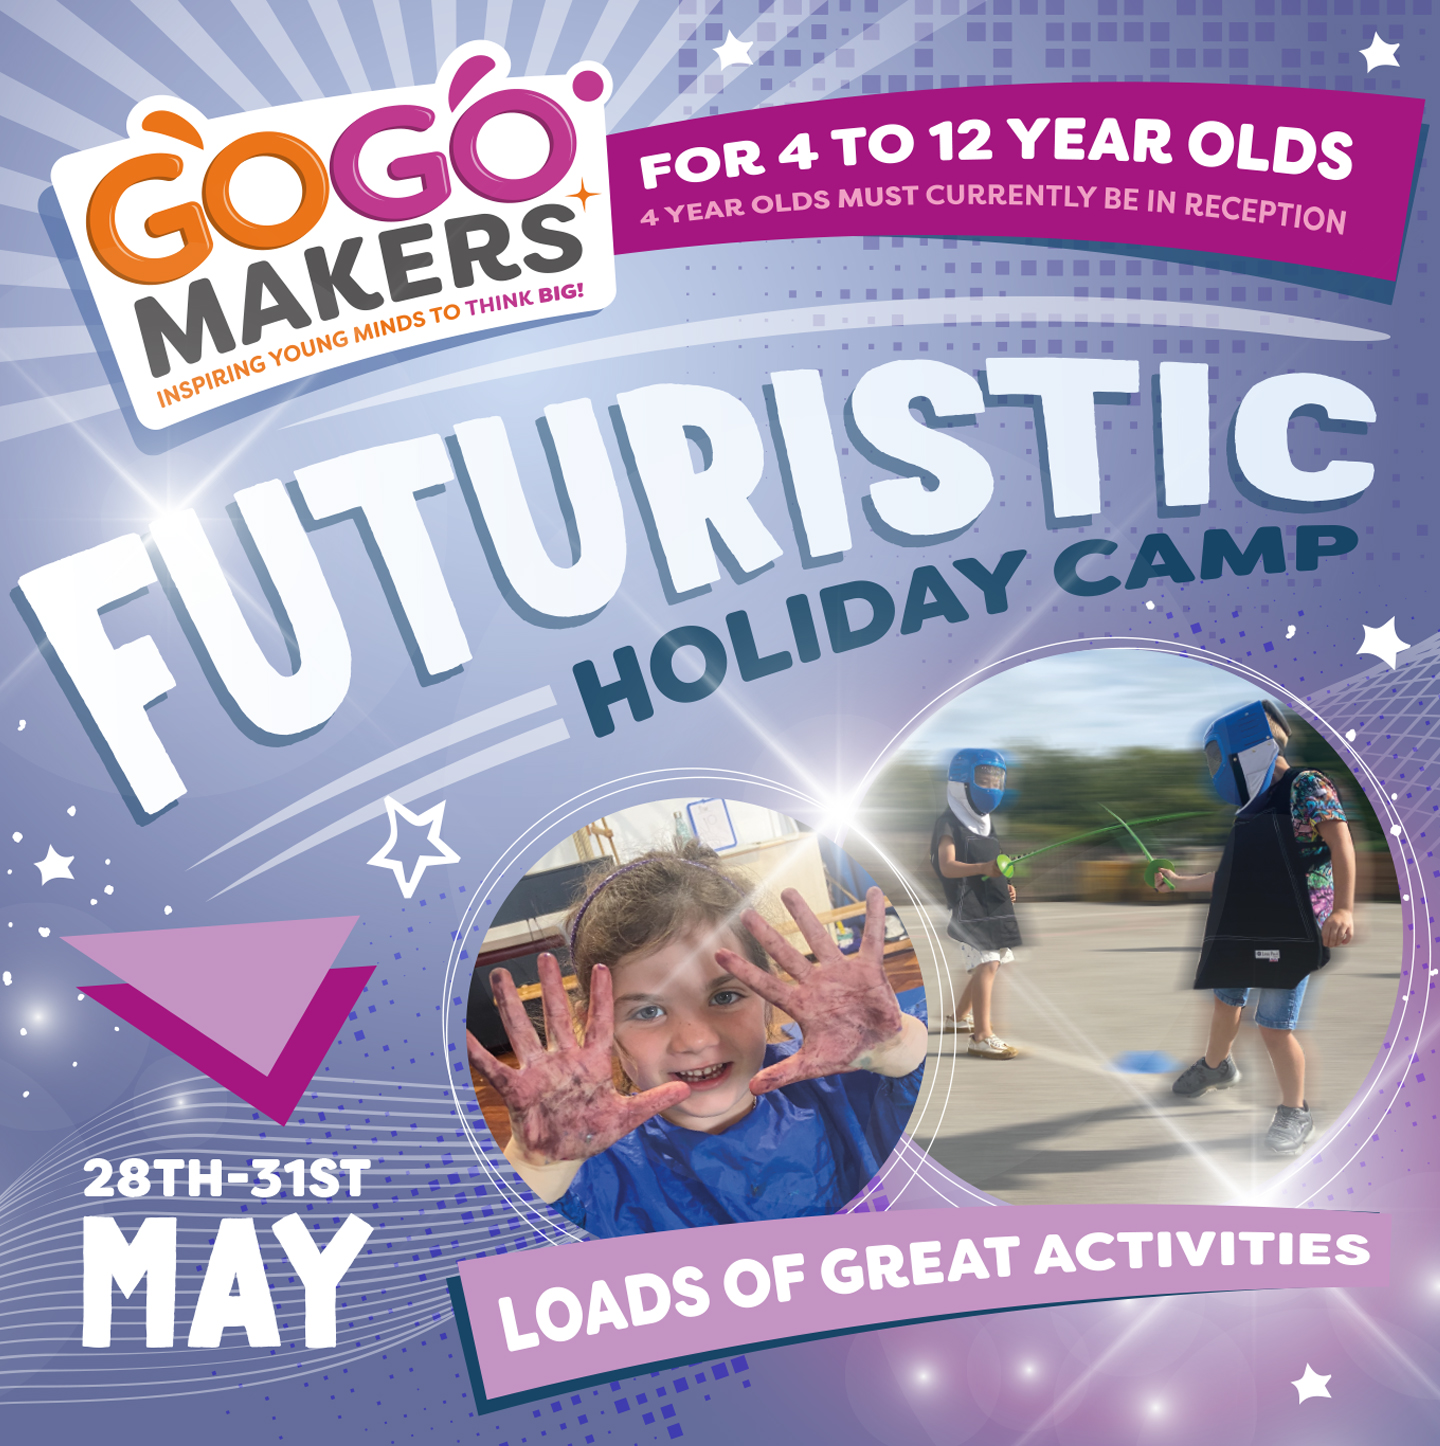 GO GO Makers May Half Term Holiday Camp at Emscote Infant School, Warwick